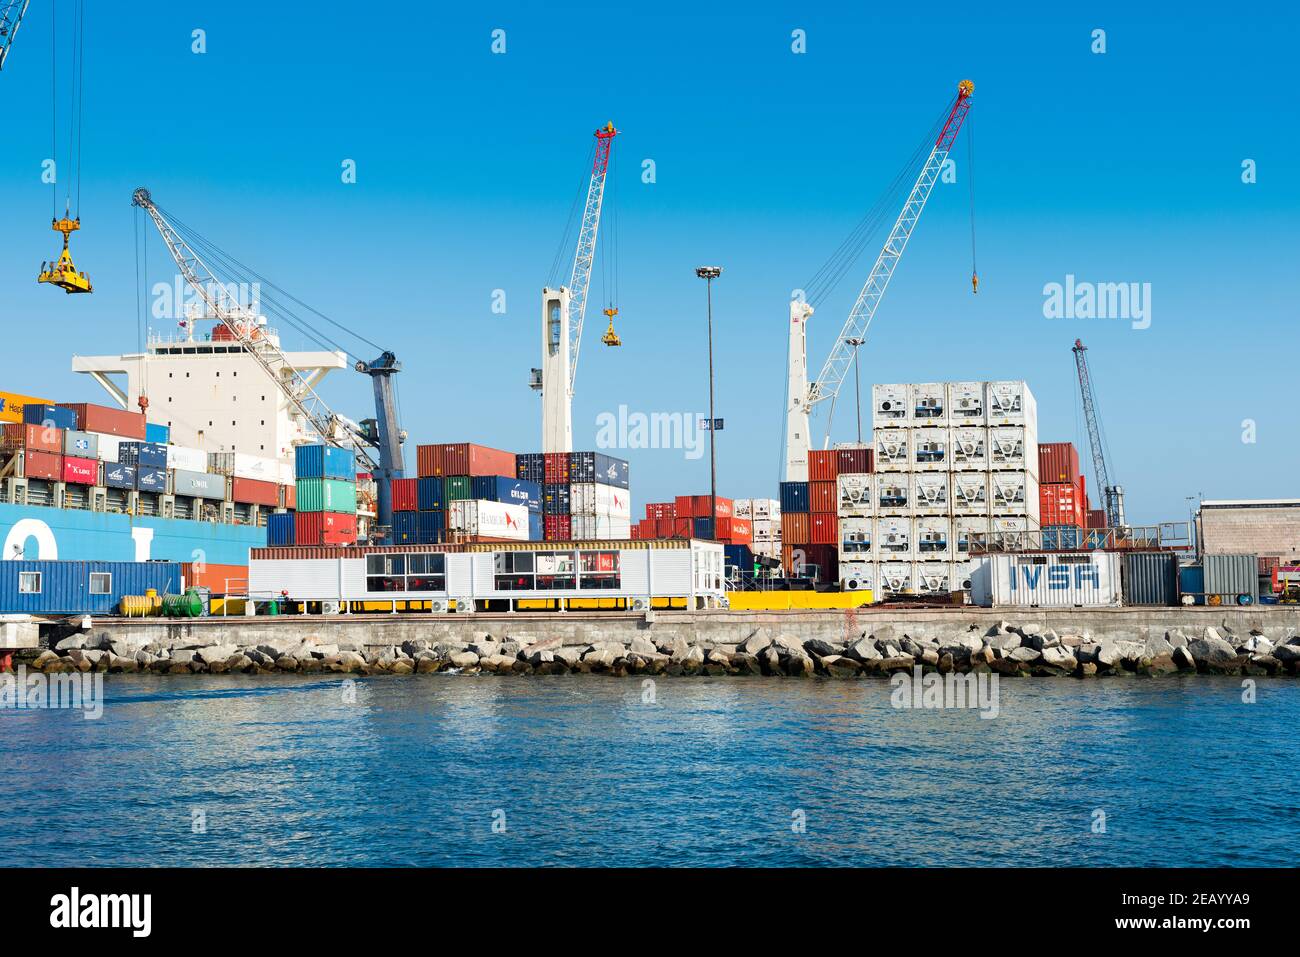 Iquique, Regio de Tarapaca; Chile - Containers prepared to be loaded in a cargo ship at the port of Iquique. Stock Photo